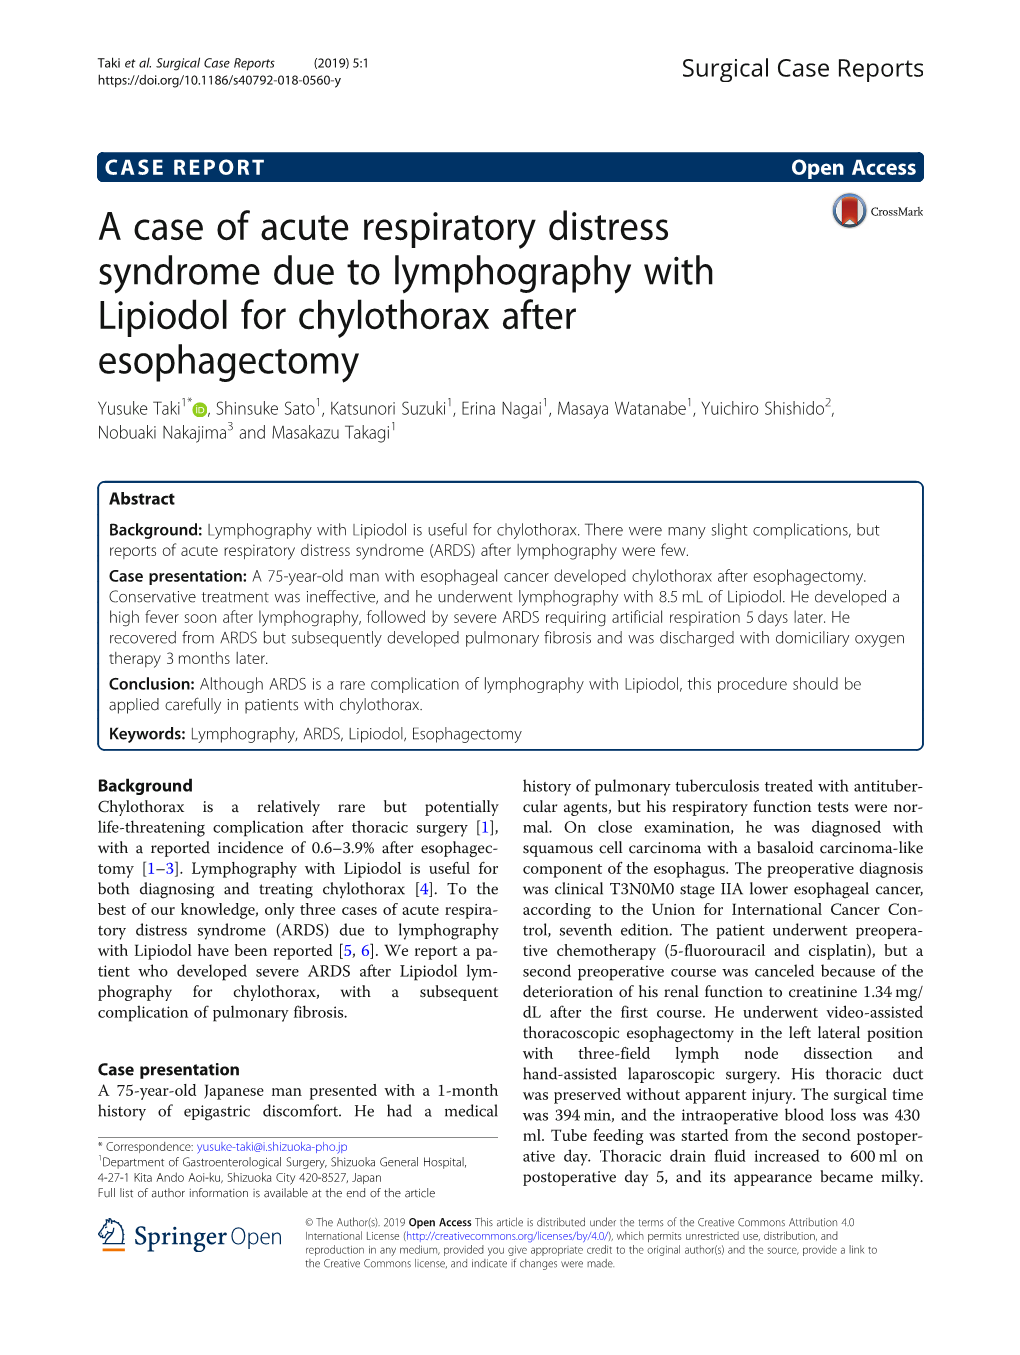 A Case of Acute Respiratory Distress Syndrome Due to Lymphography